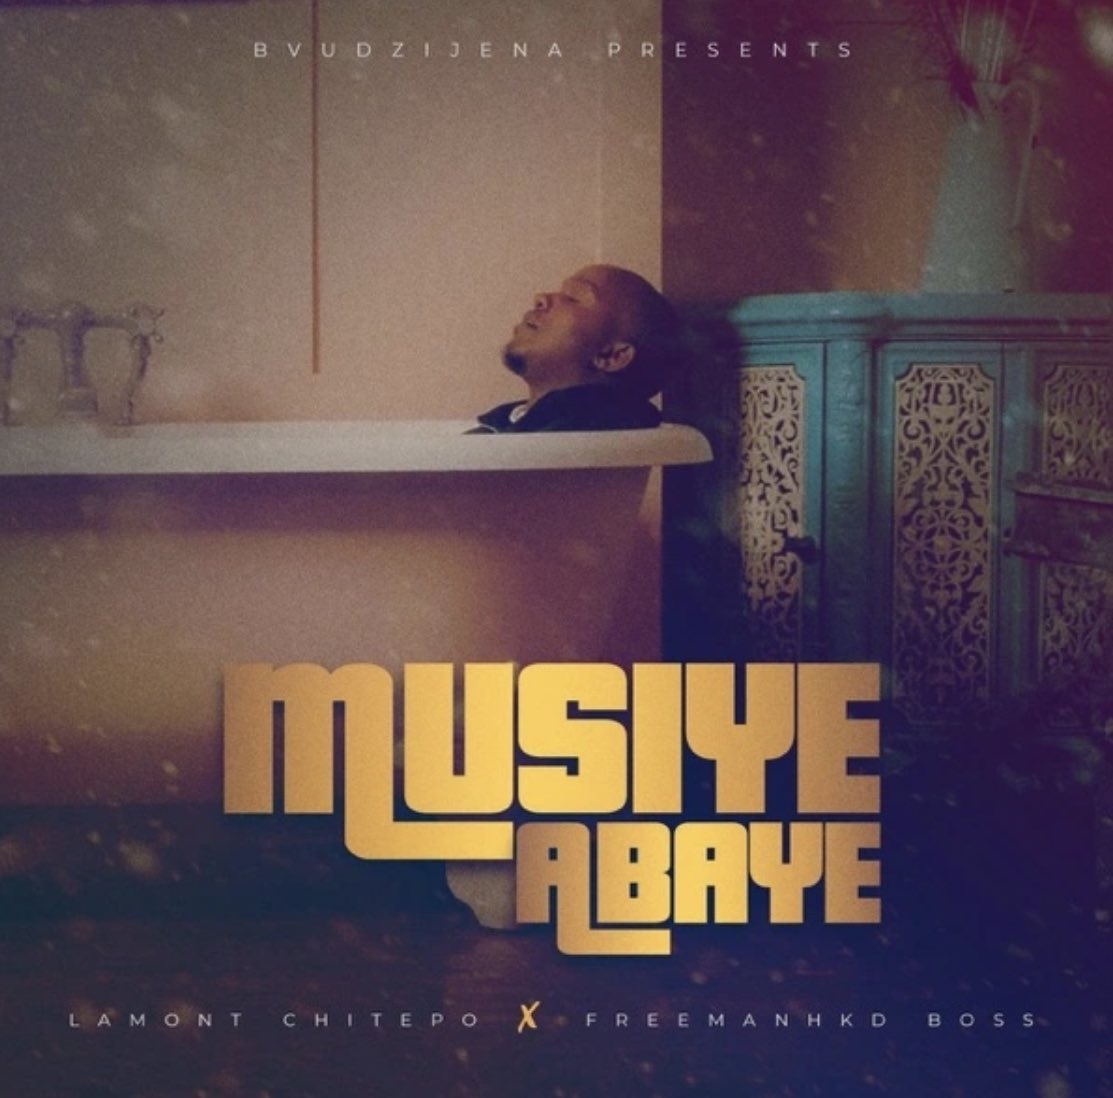 #WednesdayFeeling 

Lamont Chitepo joined forces with Freeman Hkd boss and dropped a tune titled Musiye abaye,the song is featured on Lamont Chitepo’s project dubbed Mwana WaSuzie extended play produced by Nyasha timbe.

Stream & Enjoy!